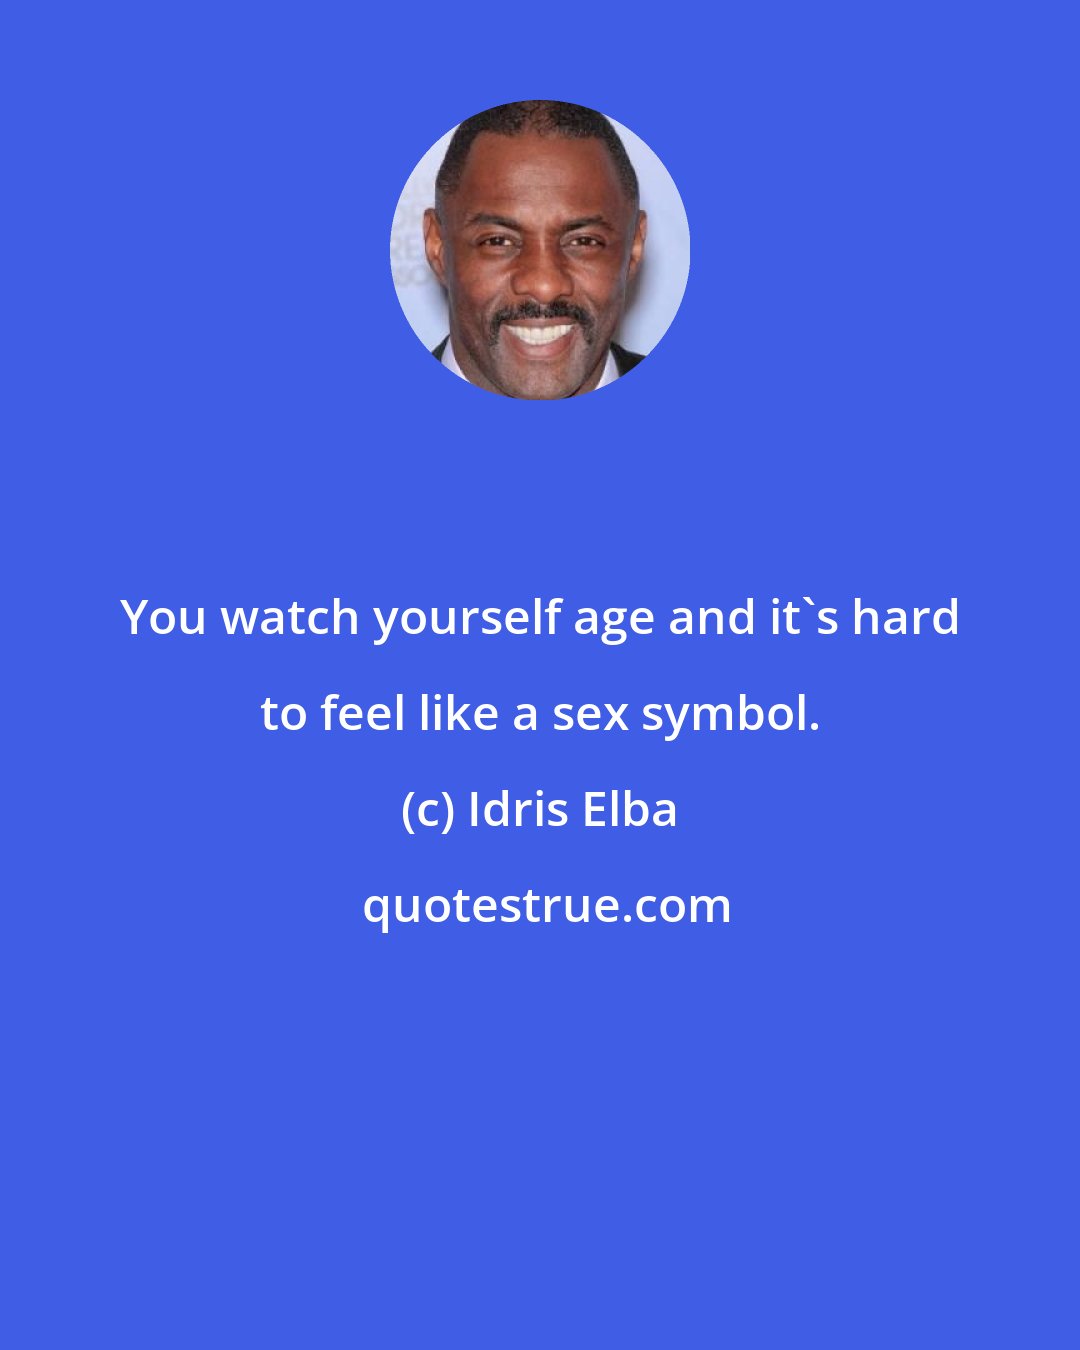 Idris Elba: You watch yourself age and it's hard to feel like a sex symbol.